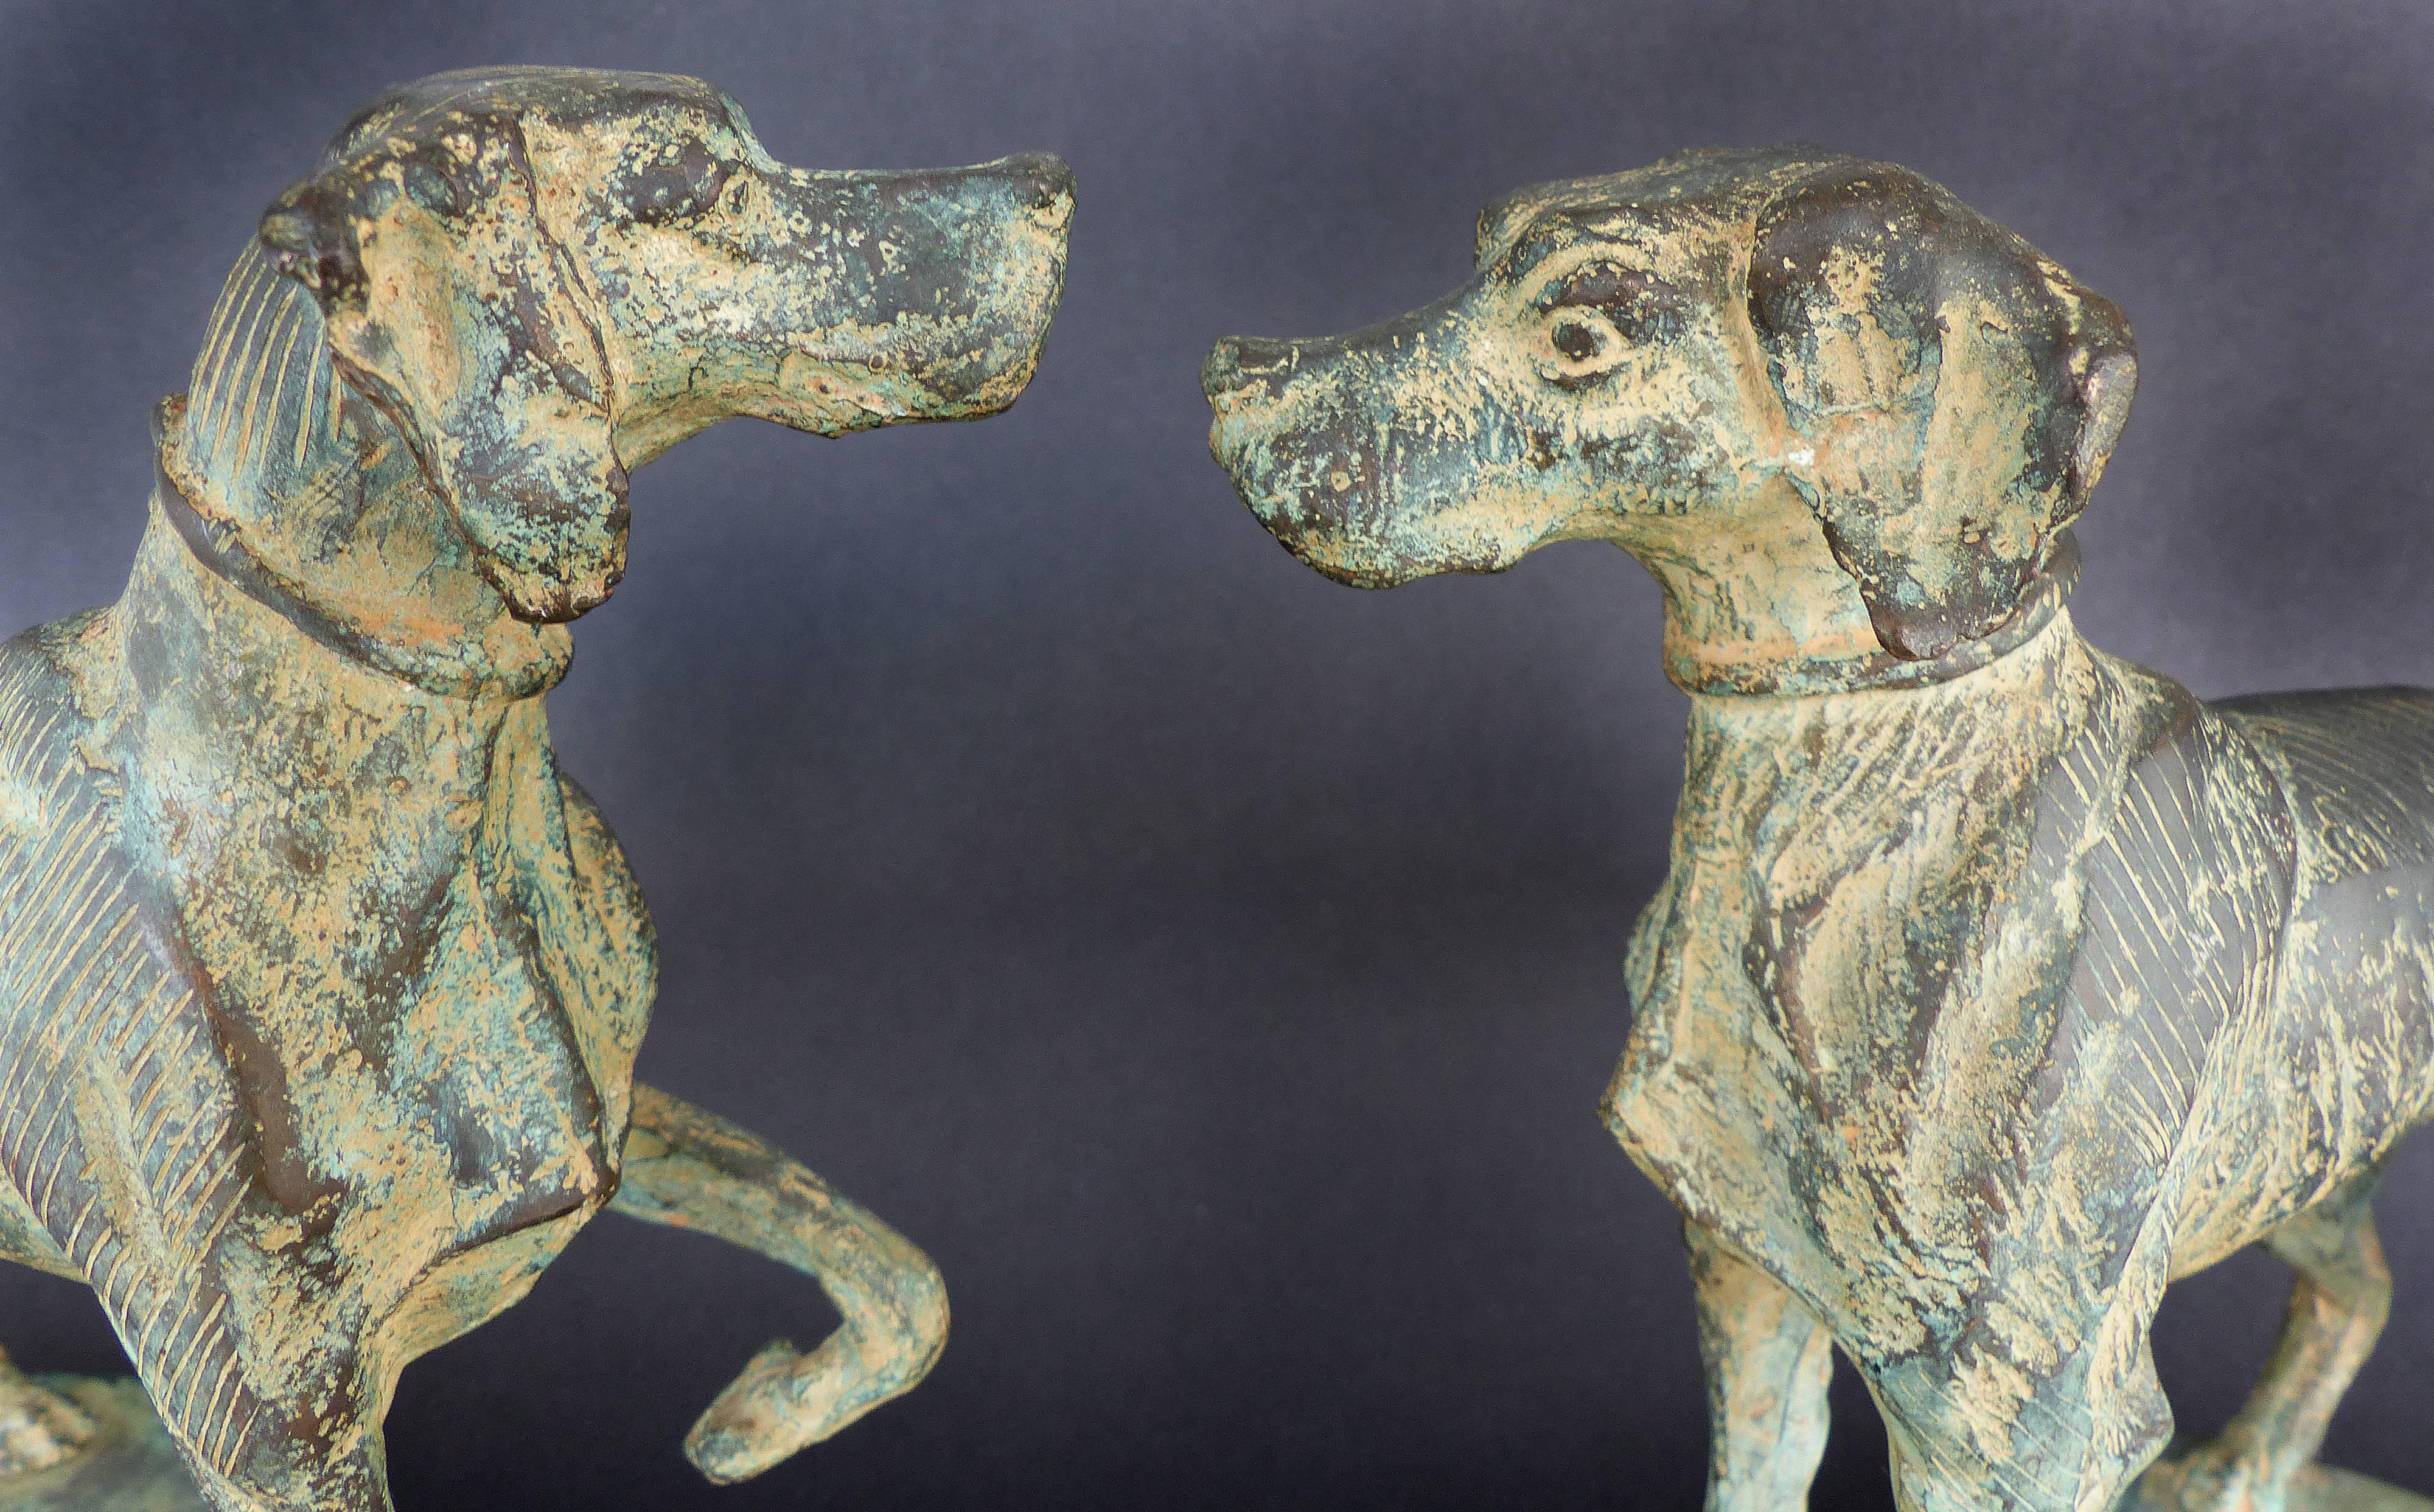 Vintage Bronze Sculpture of Two Hunting Dogs

Offered for sale is a vintage bronze sculpture of two hunting dogs presented on a curved base. The work is finished in an aged verdigris patina. The sculpture is viewed equally from either side. A great